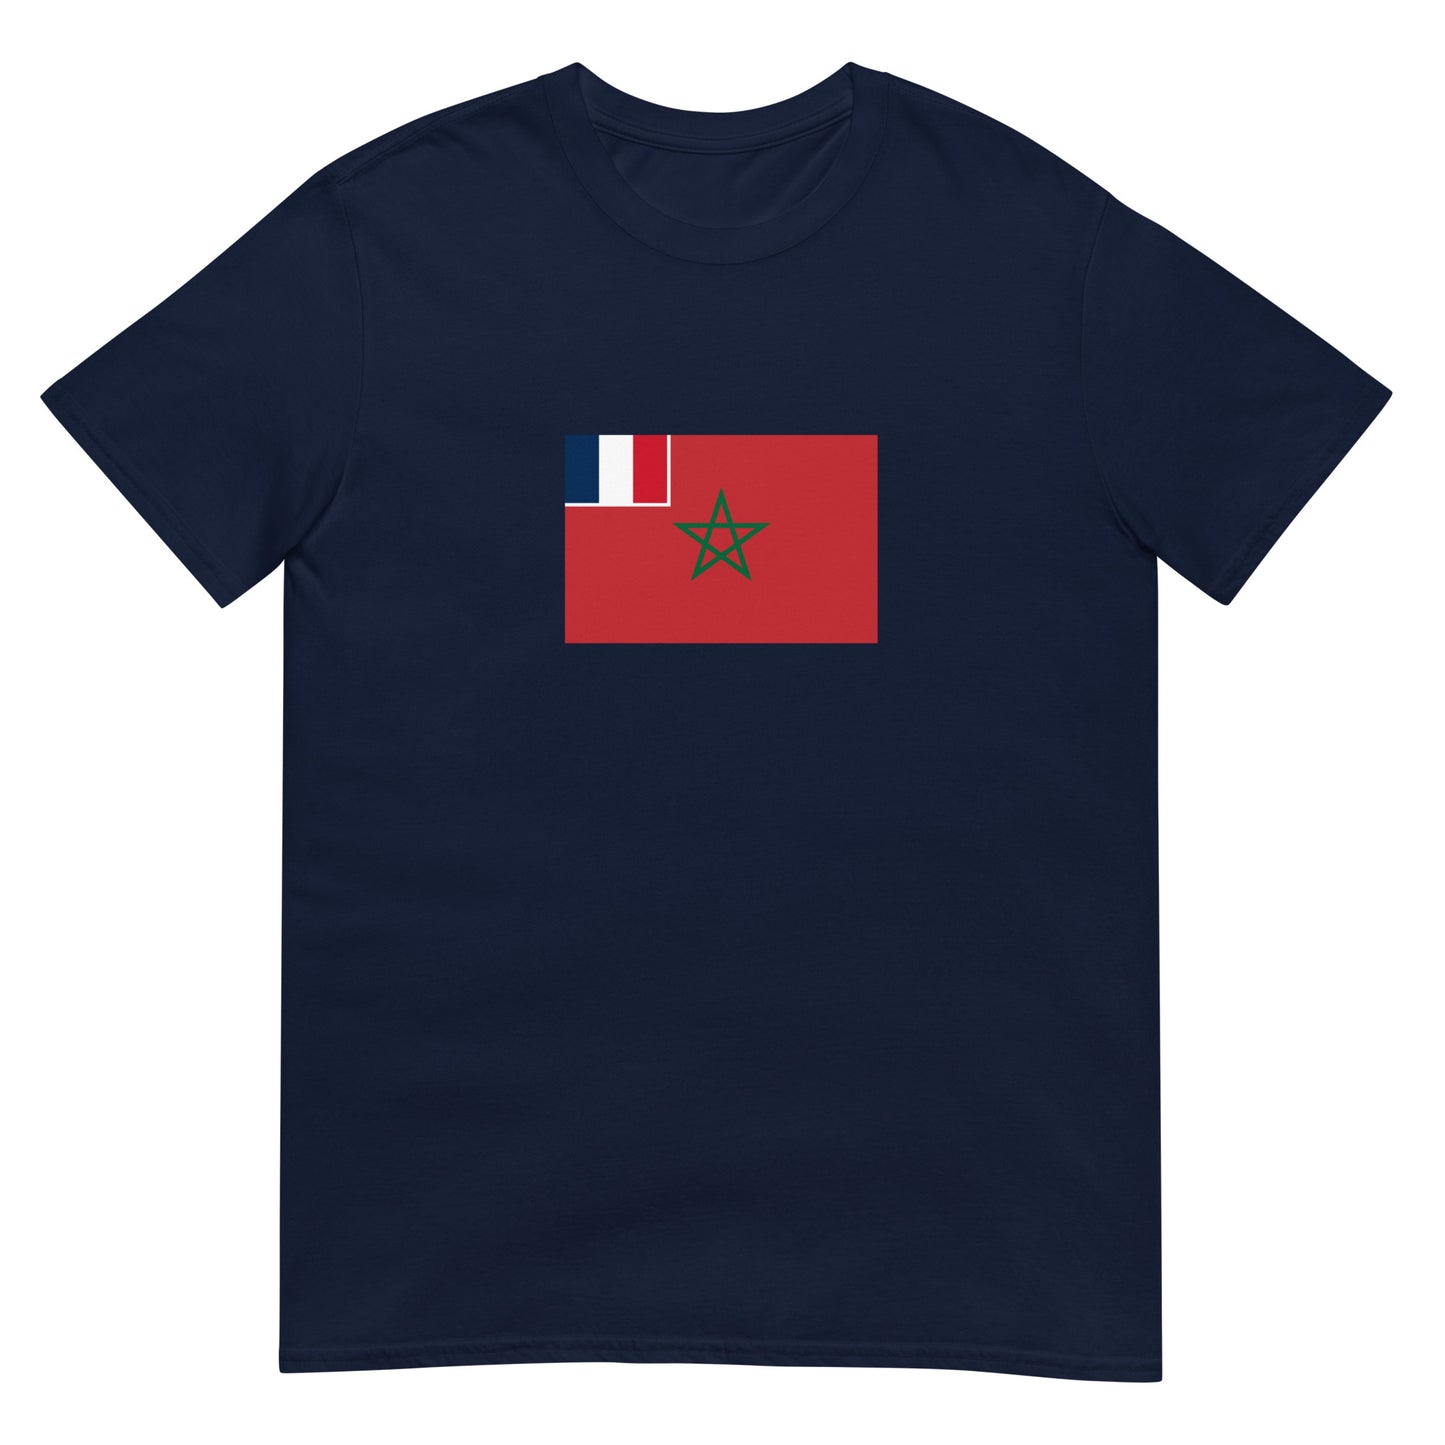 Morocco - French Protectorate in Morocco (1912-1956) | Historical Flag Short-Sleeve Unisex T-Shirt